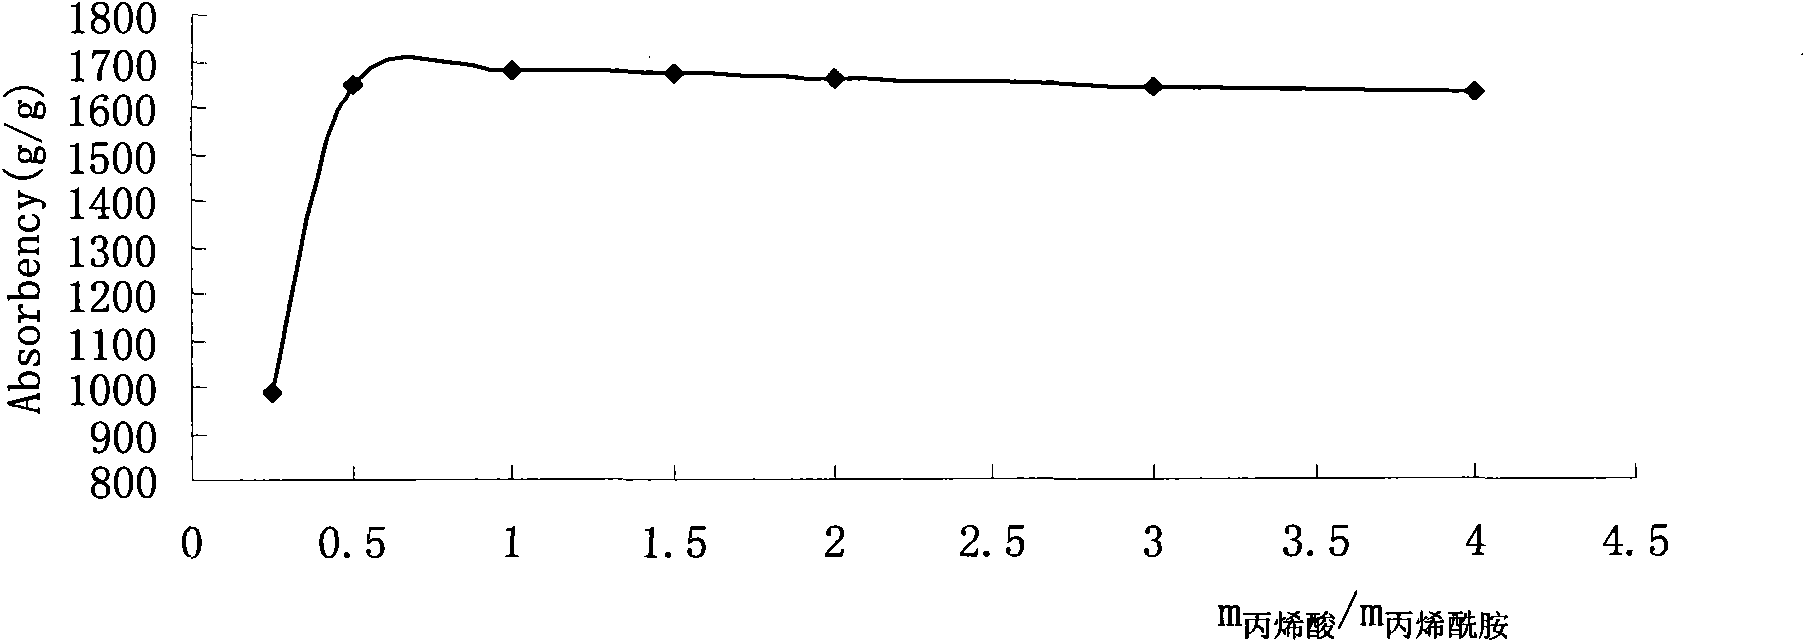 Method for preparing potassium- and nitrogen-containing high water-absorbent resin from carboxymethyl potato starch serving as raw material